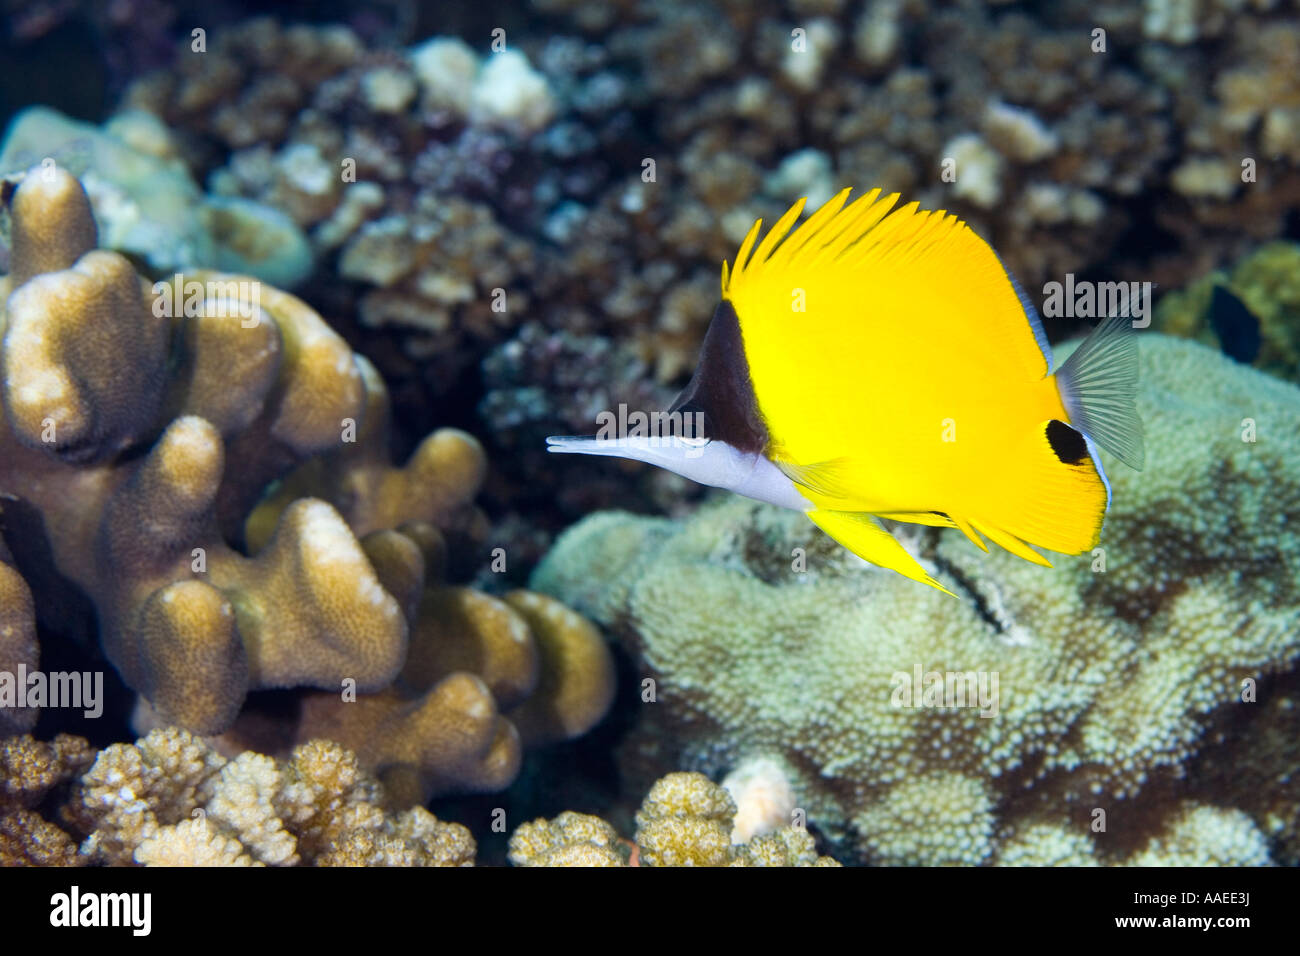 Long nose butterflyfish, Forcipiger flavissimus swimming among corals on the reef Stock Photo